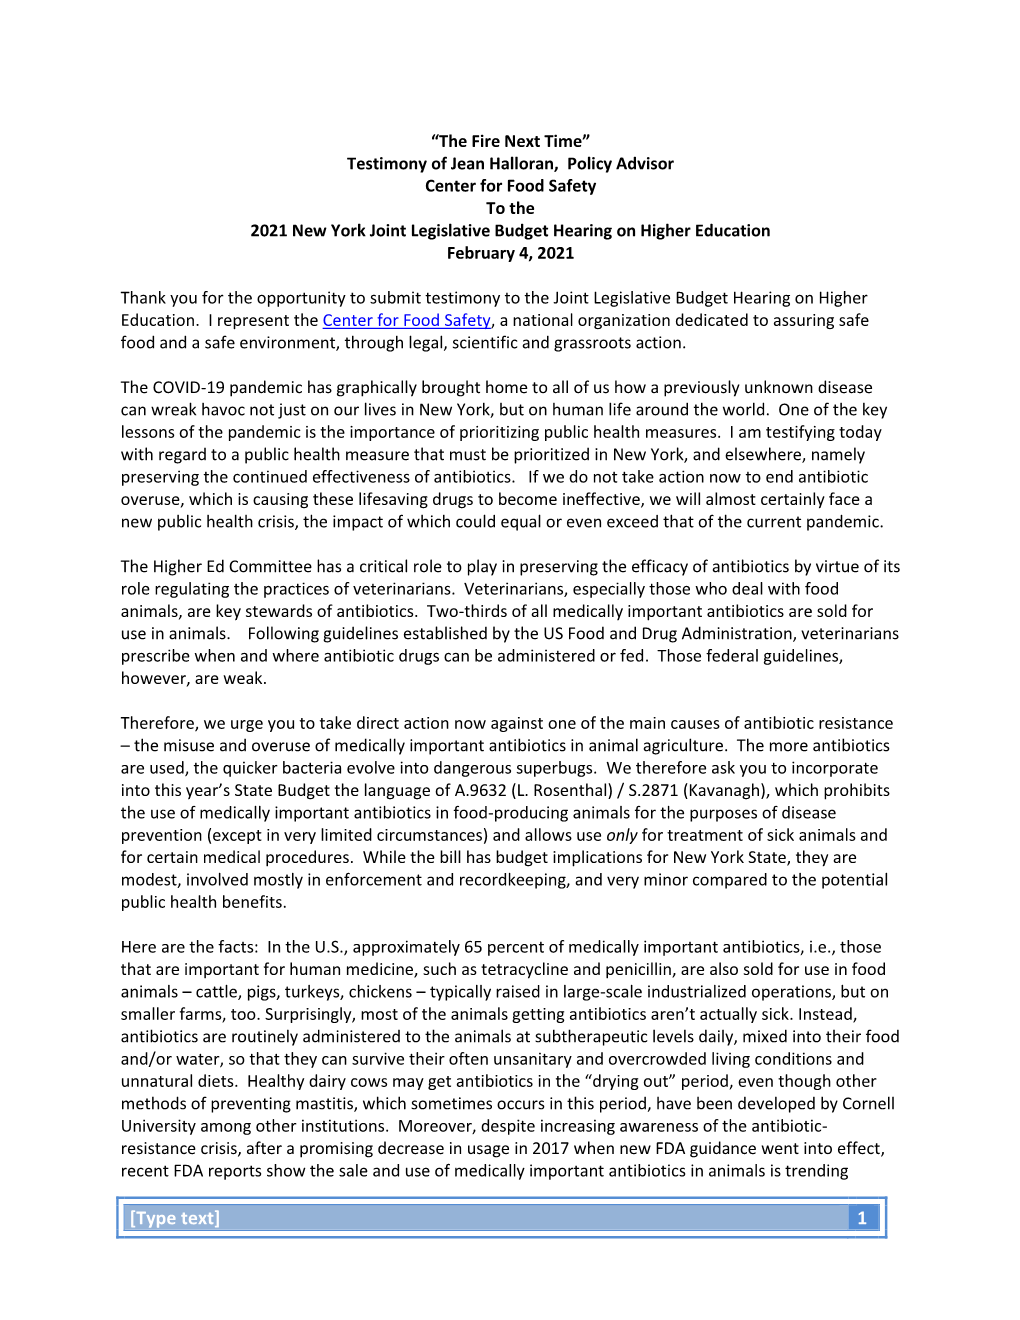 Center for Food Safety to the 2021 New York Joint Legislative Budget Hearing on Higher Education February 4, 2021